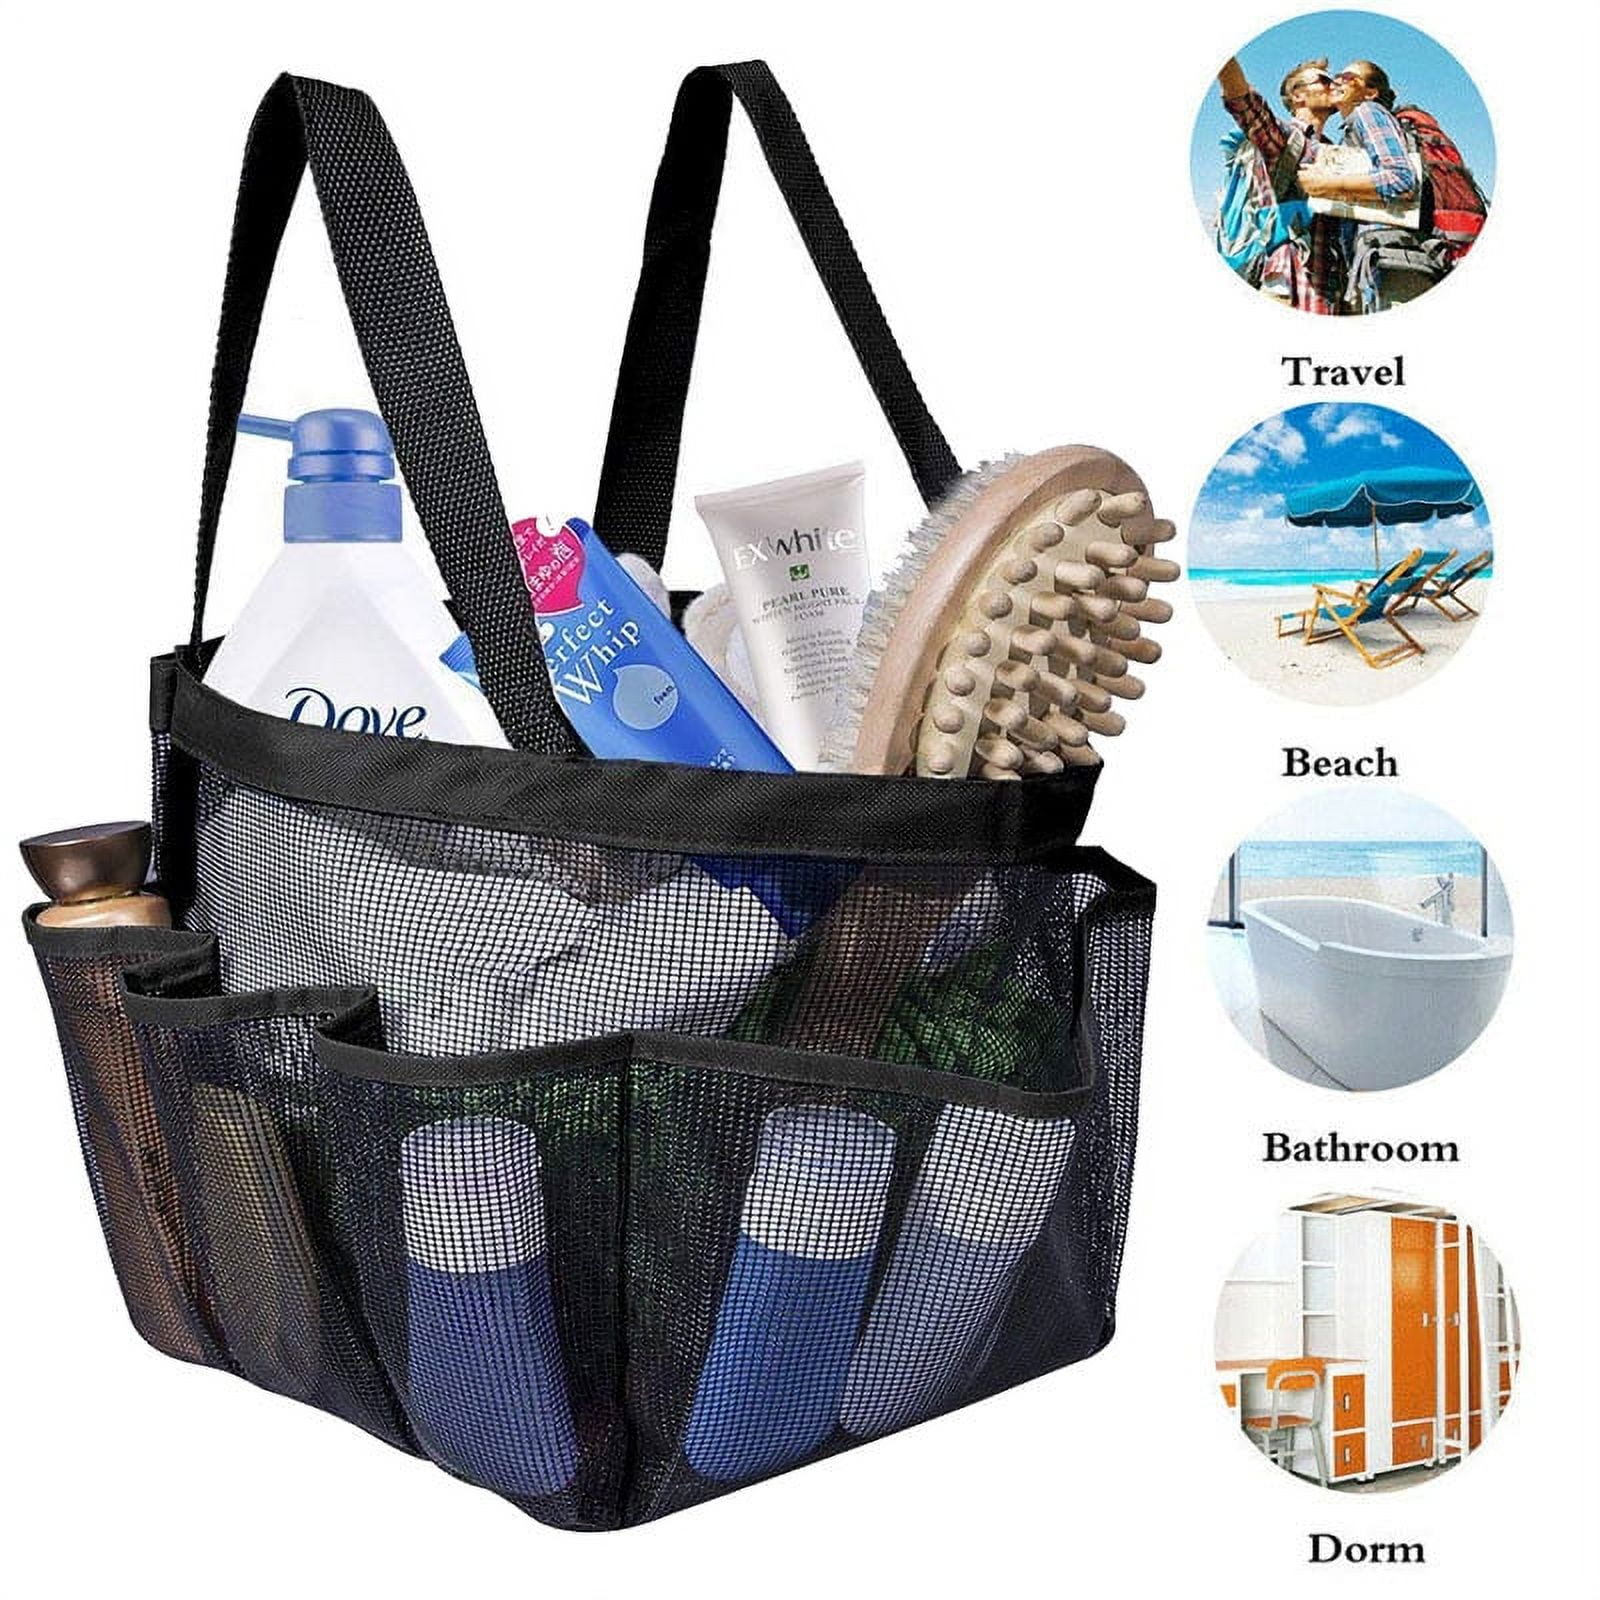 Plastic Organizer Storage Basket Hollow Cleaning Caddy with Handle